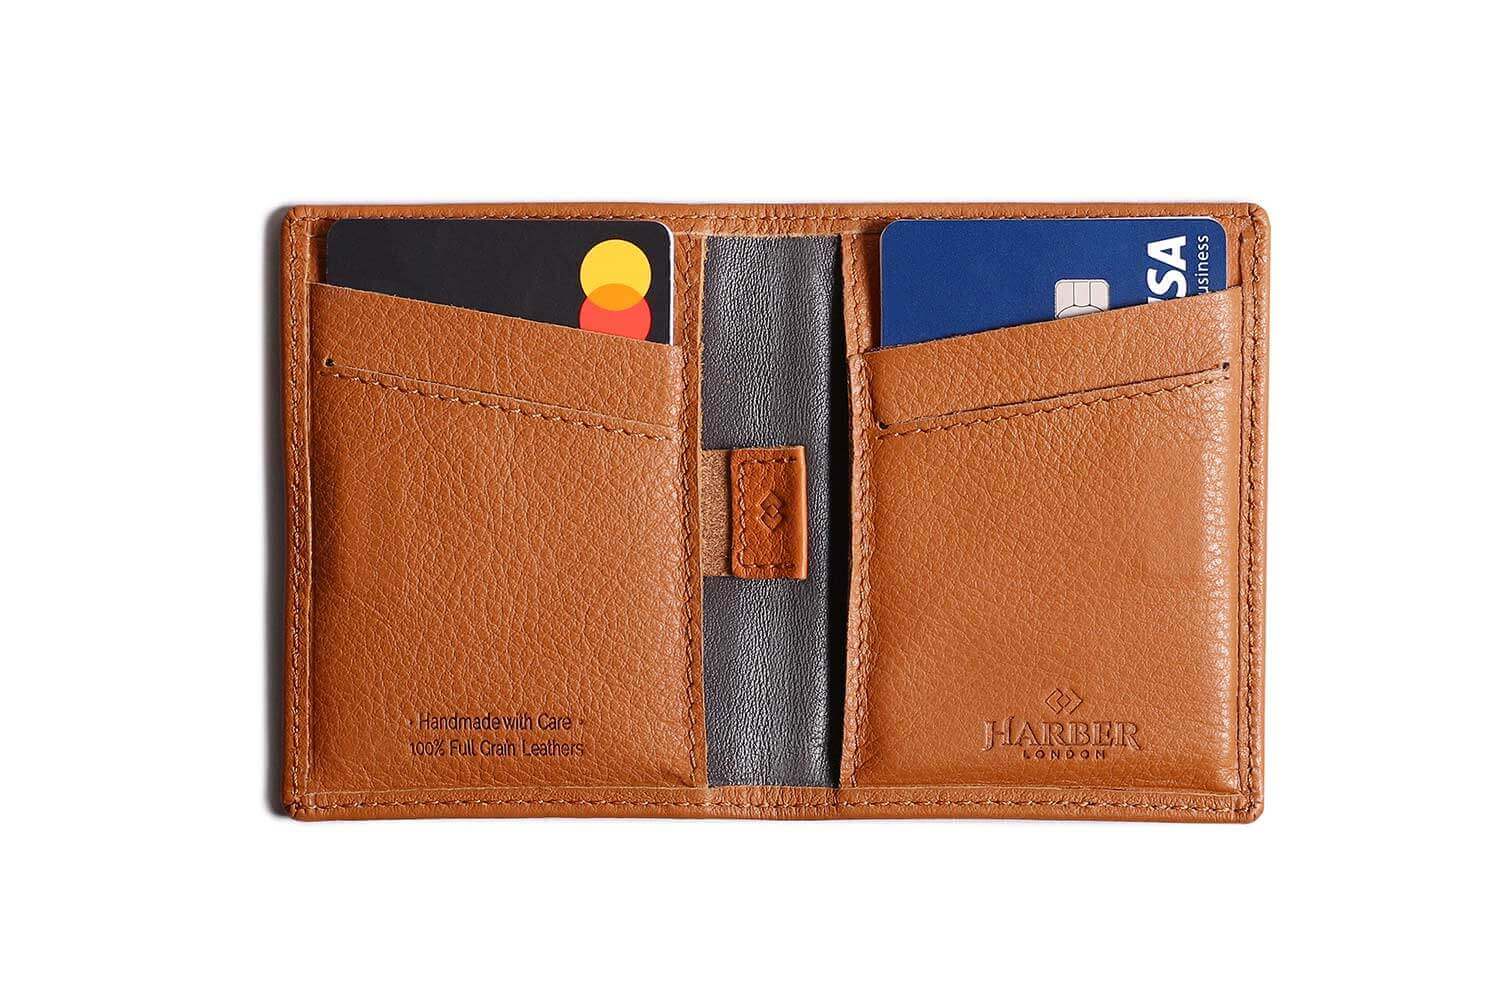 AirTag Billfold Wallet With Hidden Pocket to Fit Inside Apple's AirTag  Handcrafted From Premium Italian Leather 